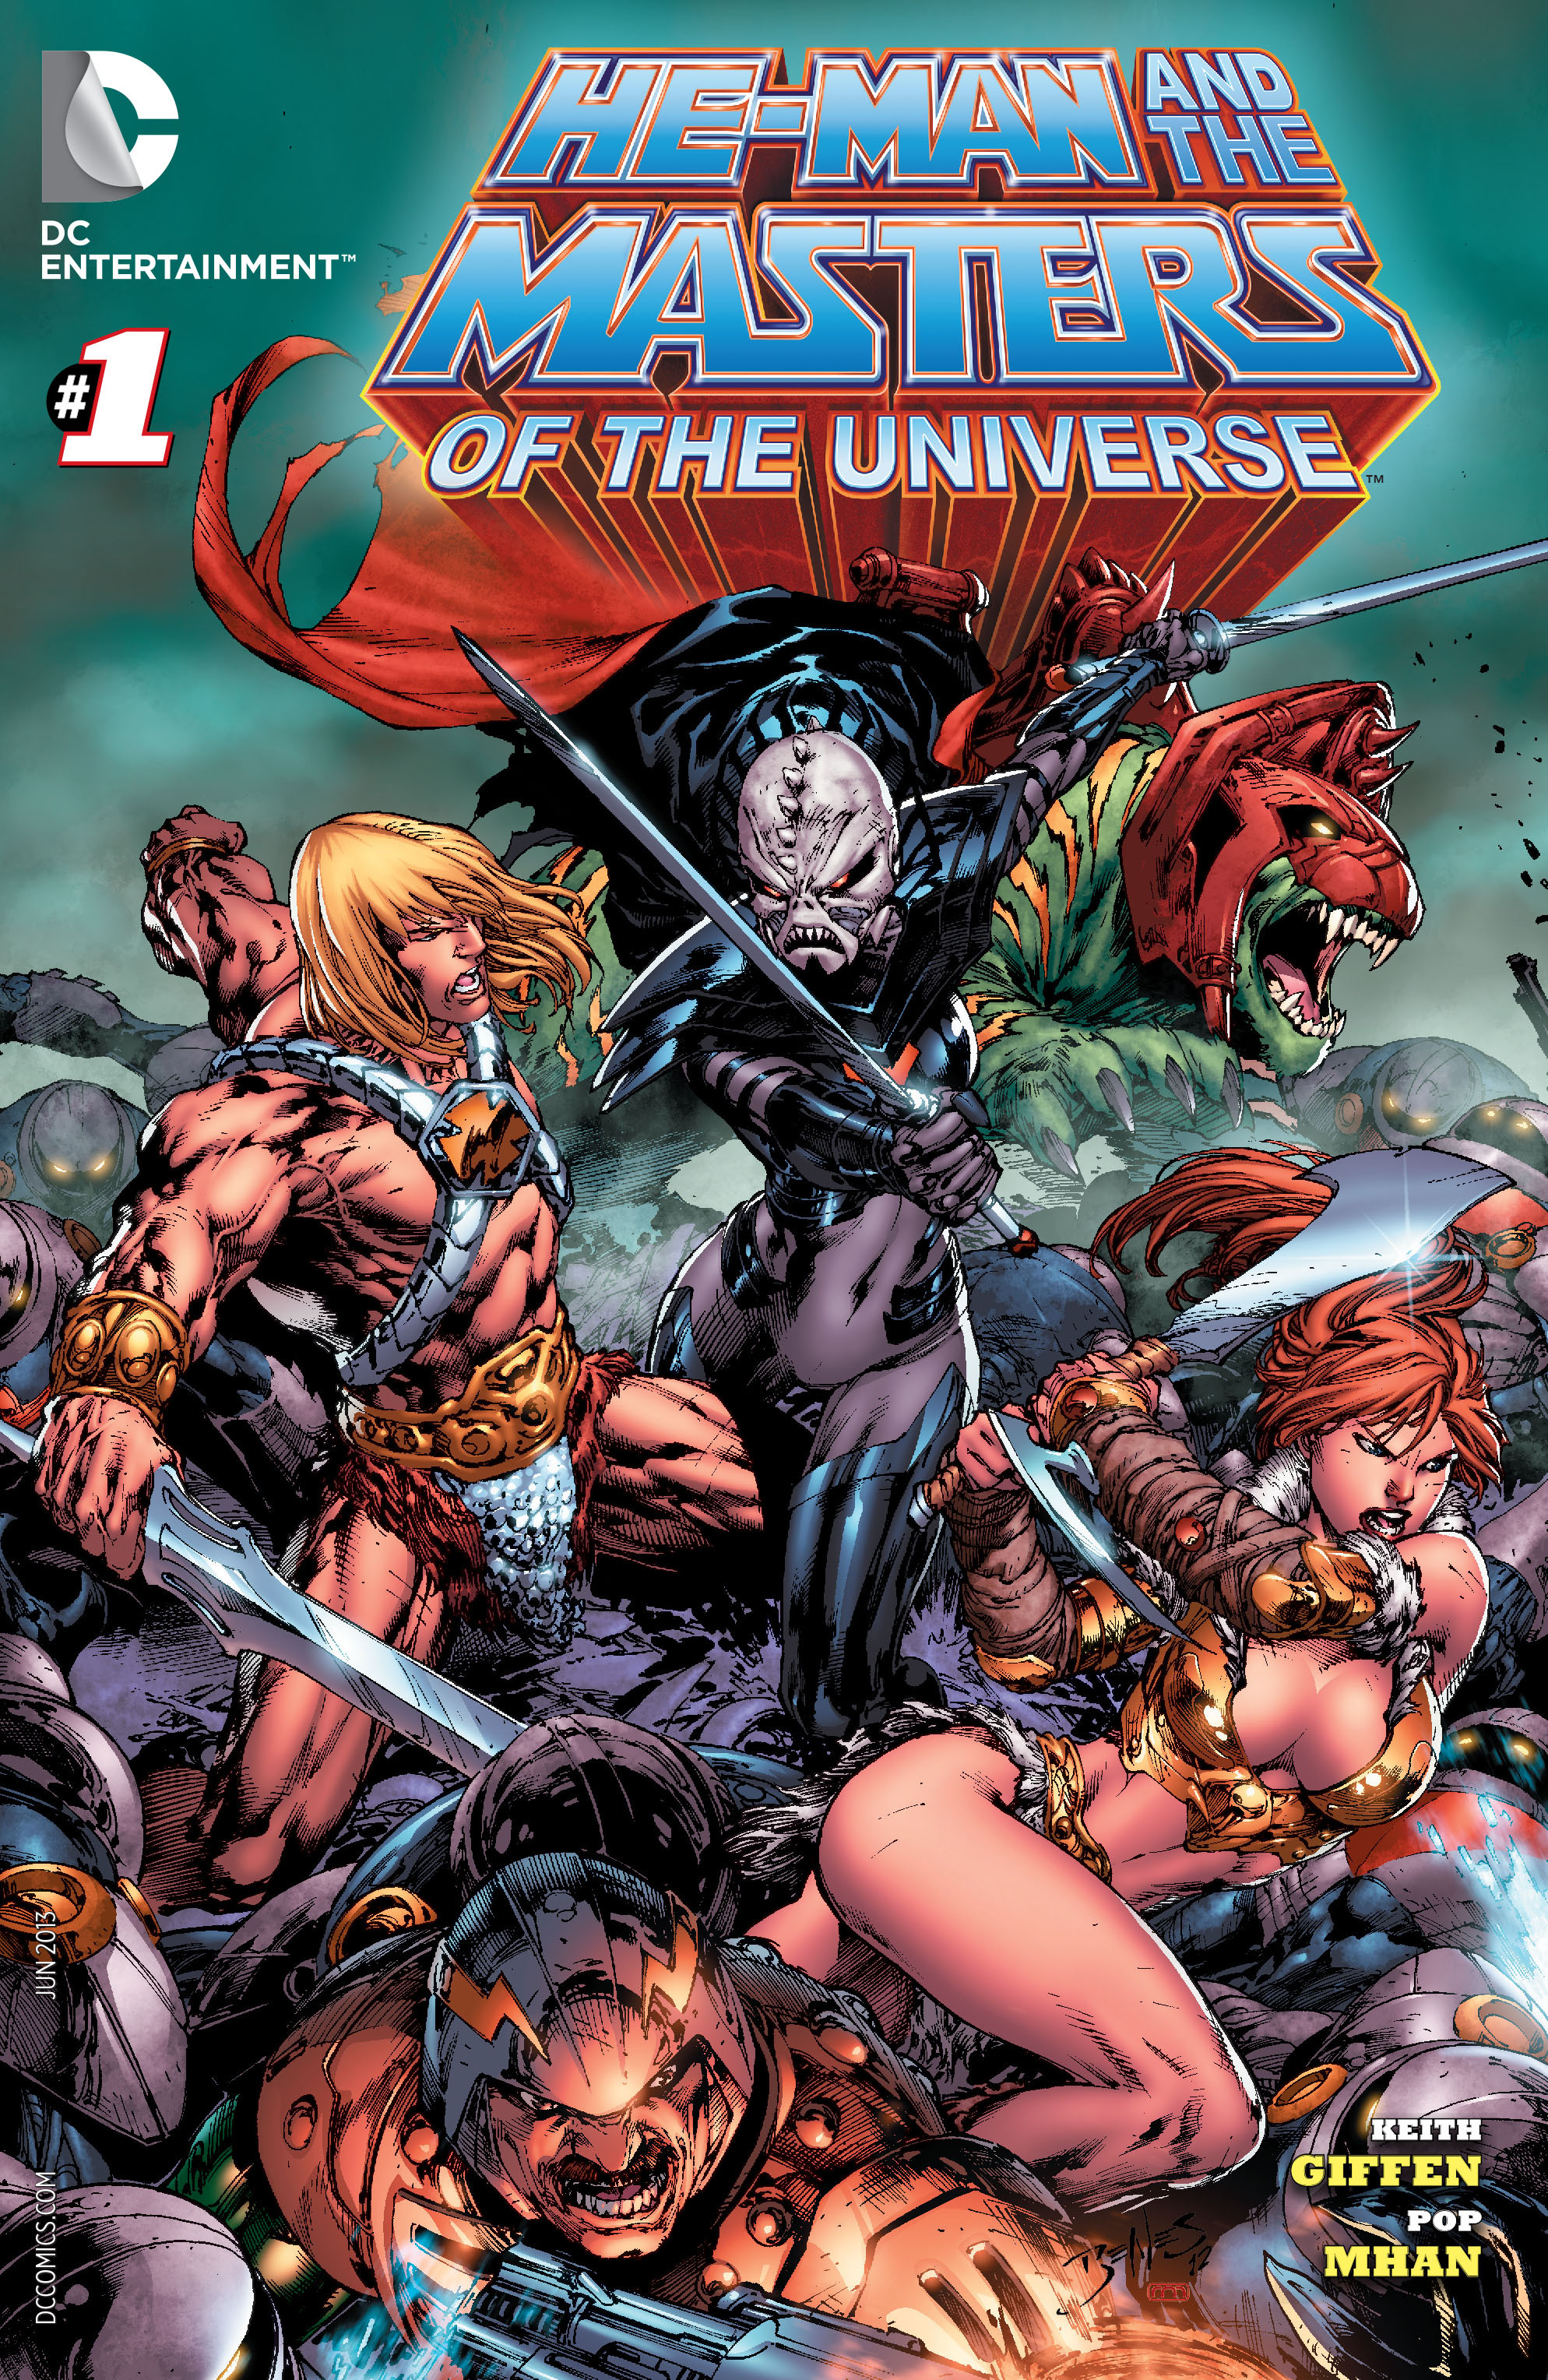 He-man And The Masters Of The Universe Hd Wallpapers, - He Man And The Masters Of The Universe Dc Comics - HD Wallpaper 